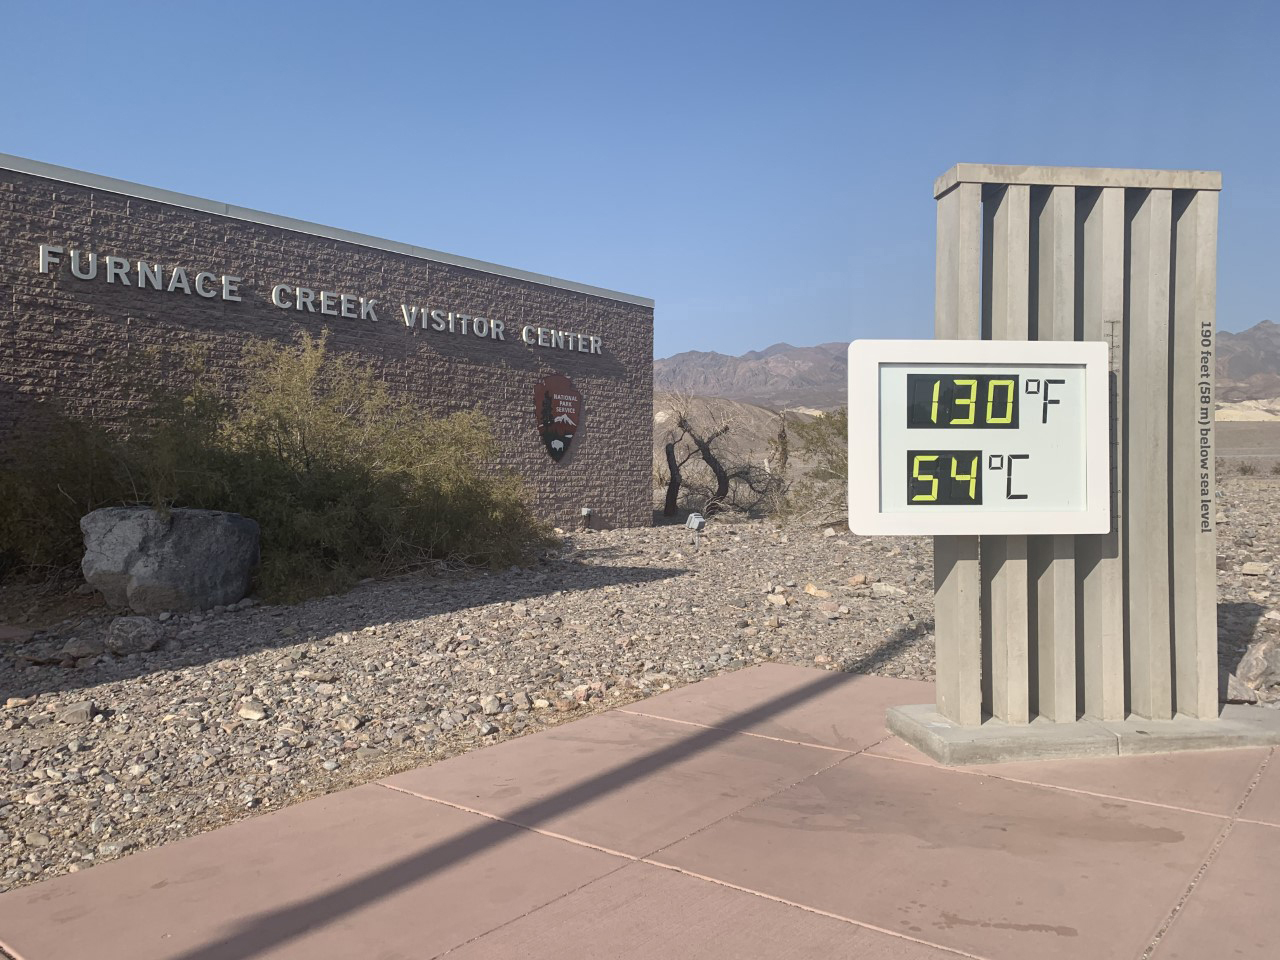 A display thermometer reads 130 F 54 C in front of a brick building.